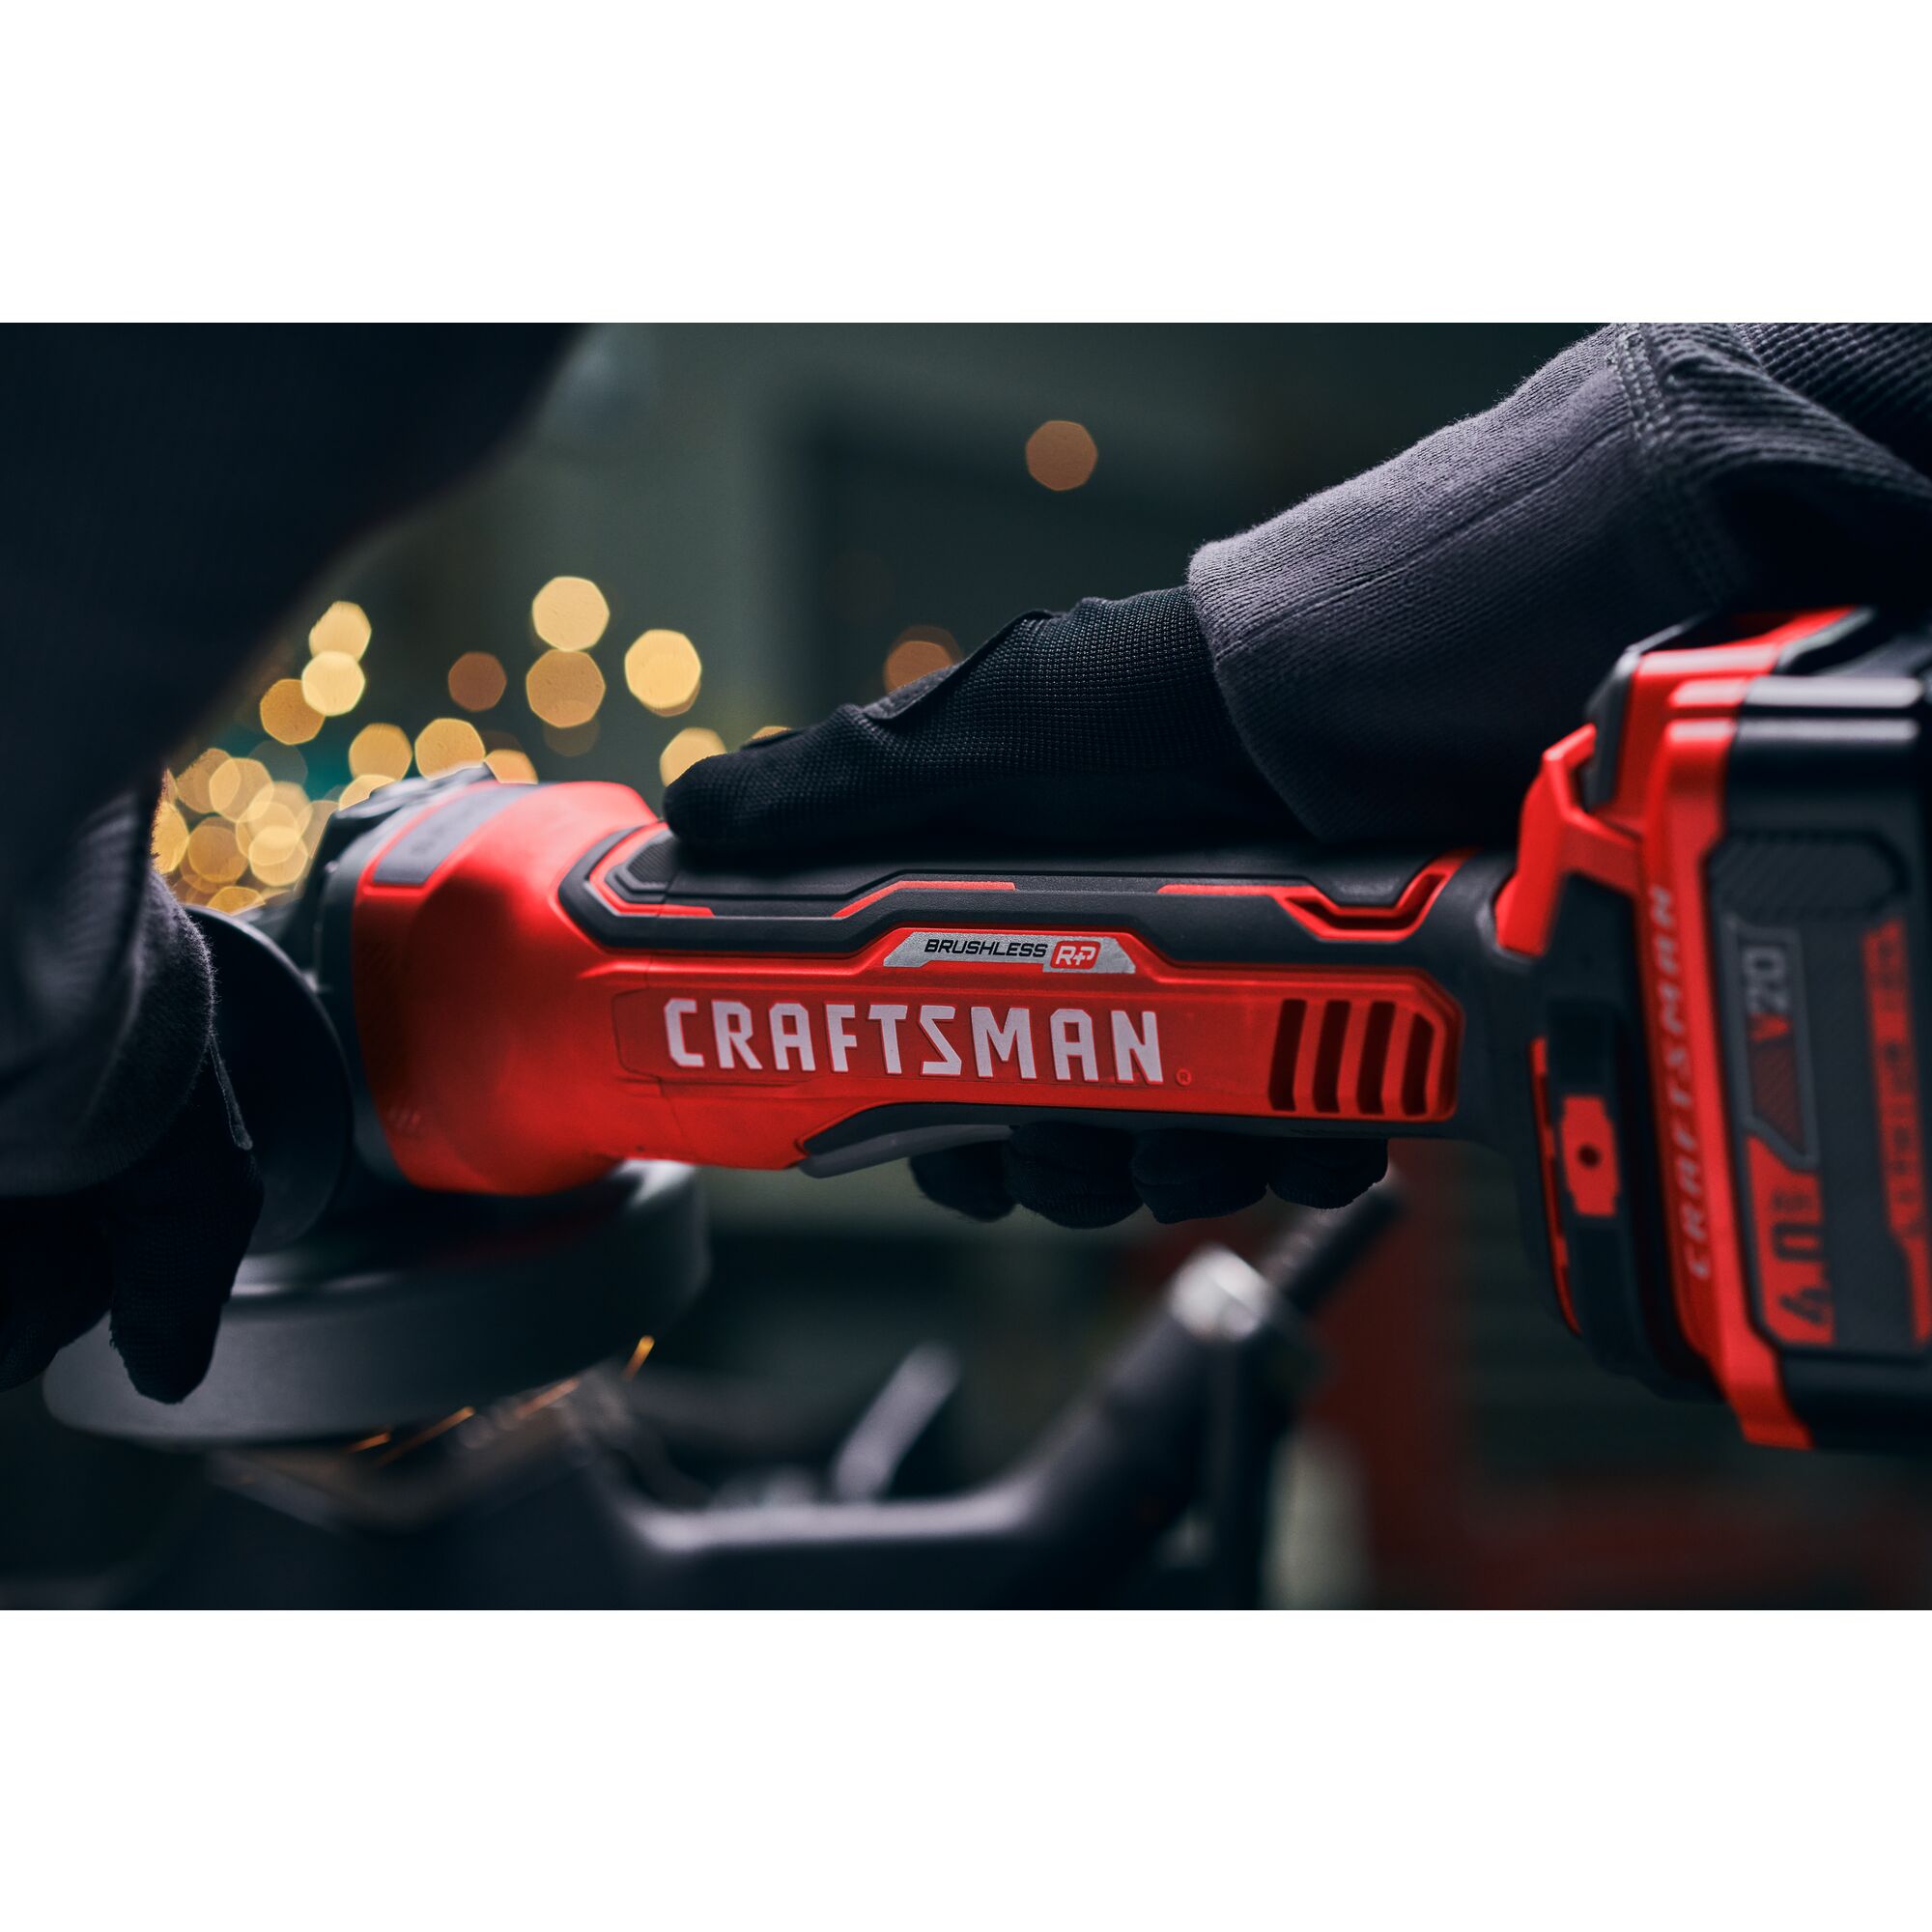 View of CRAFTSMAN Grinders  being used by consumer